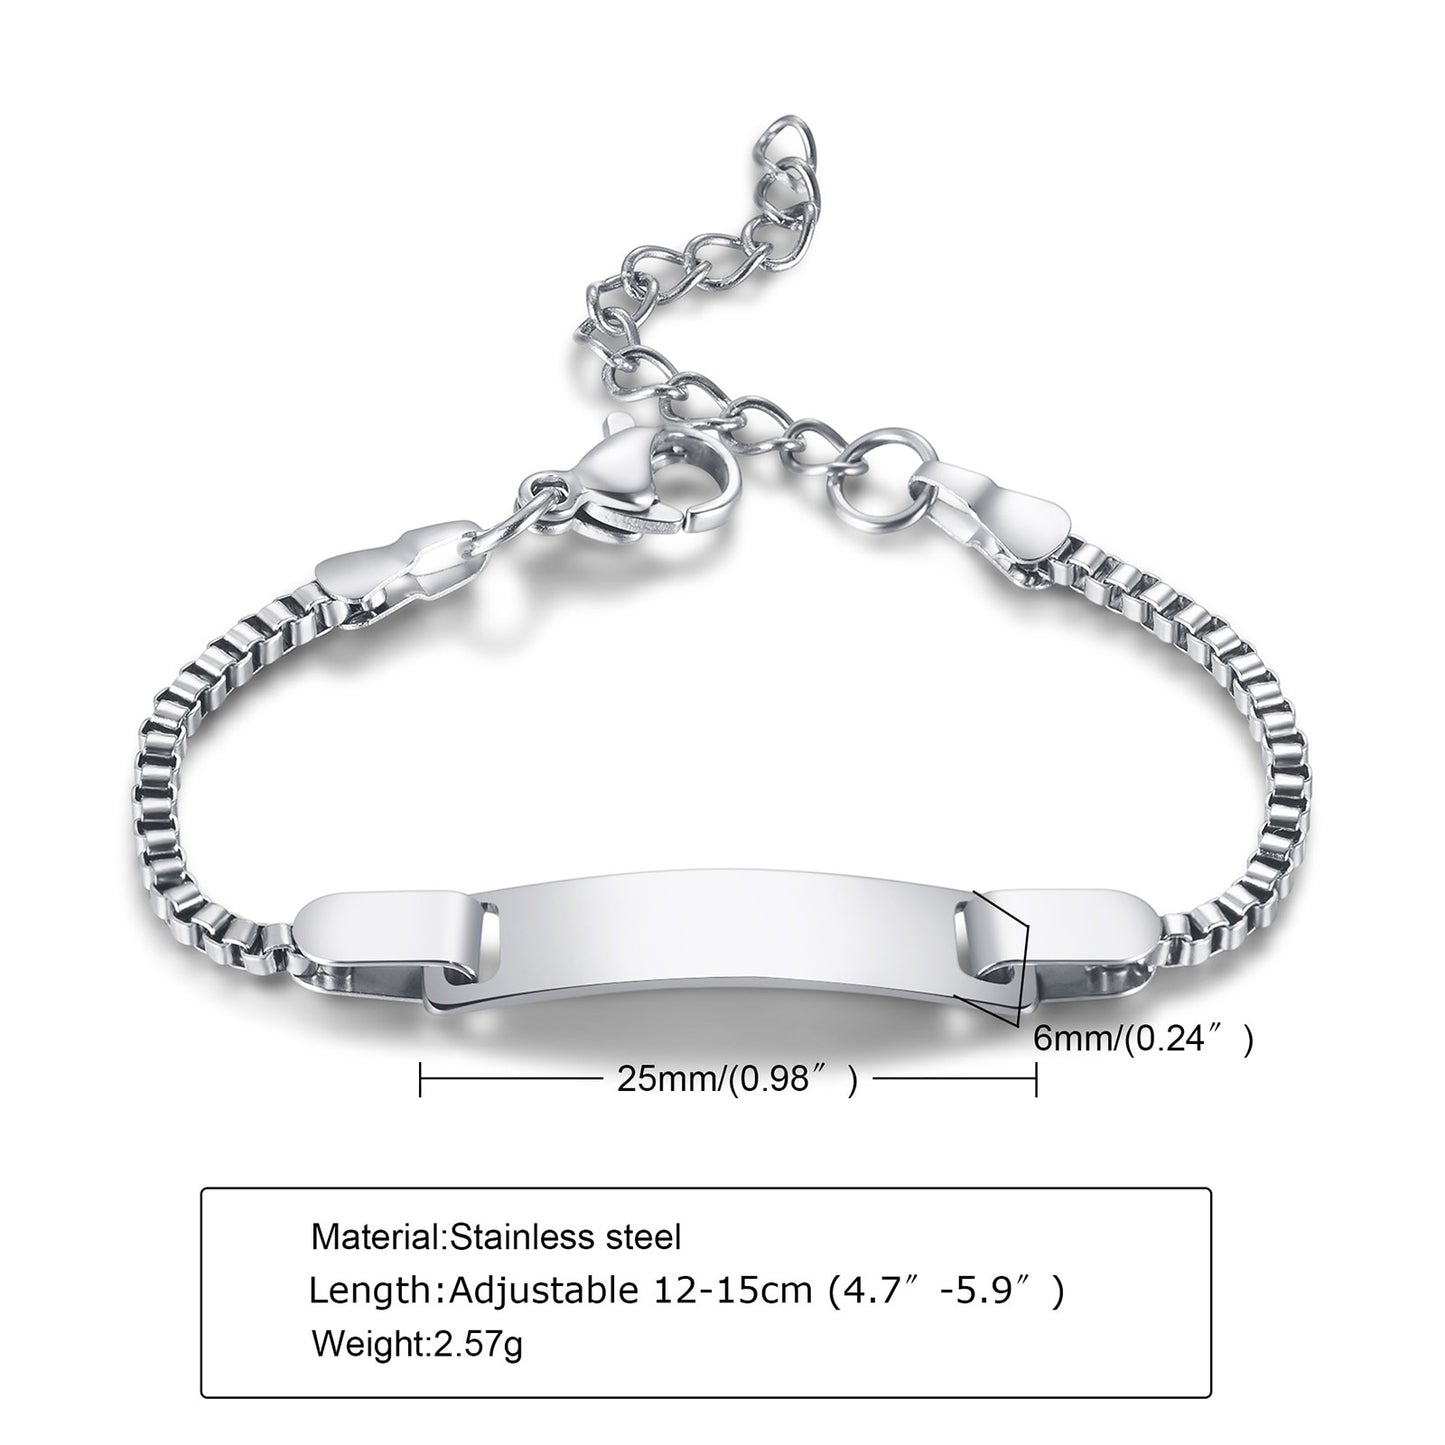 Custom Personalized Name Baby ID Bracelet, Stainless Steel Curb Chain Link Crown Bracelet Newborn Gilrs Boy Gifts Not Allergic